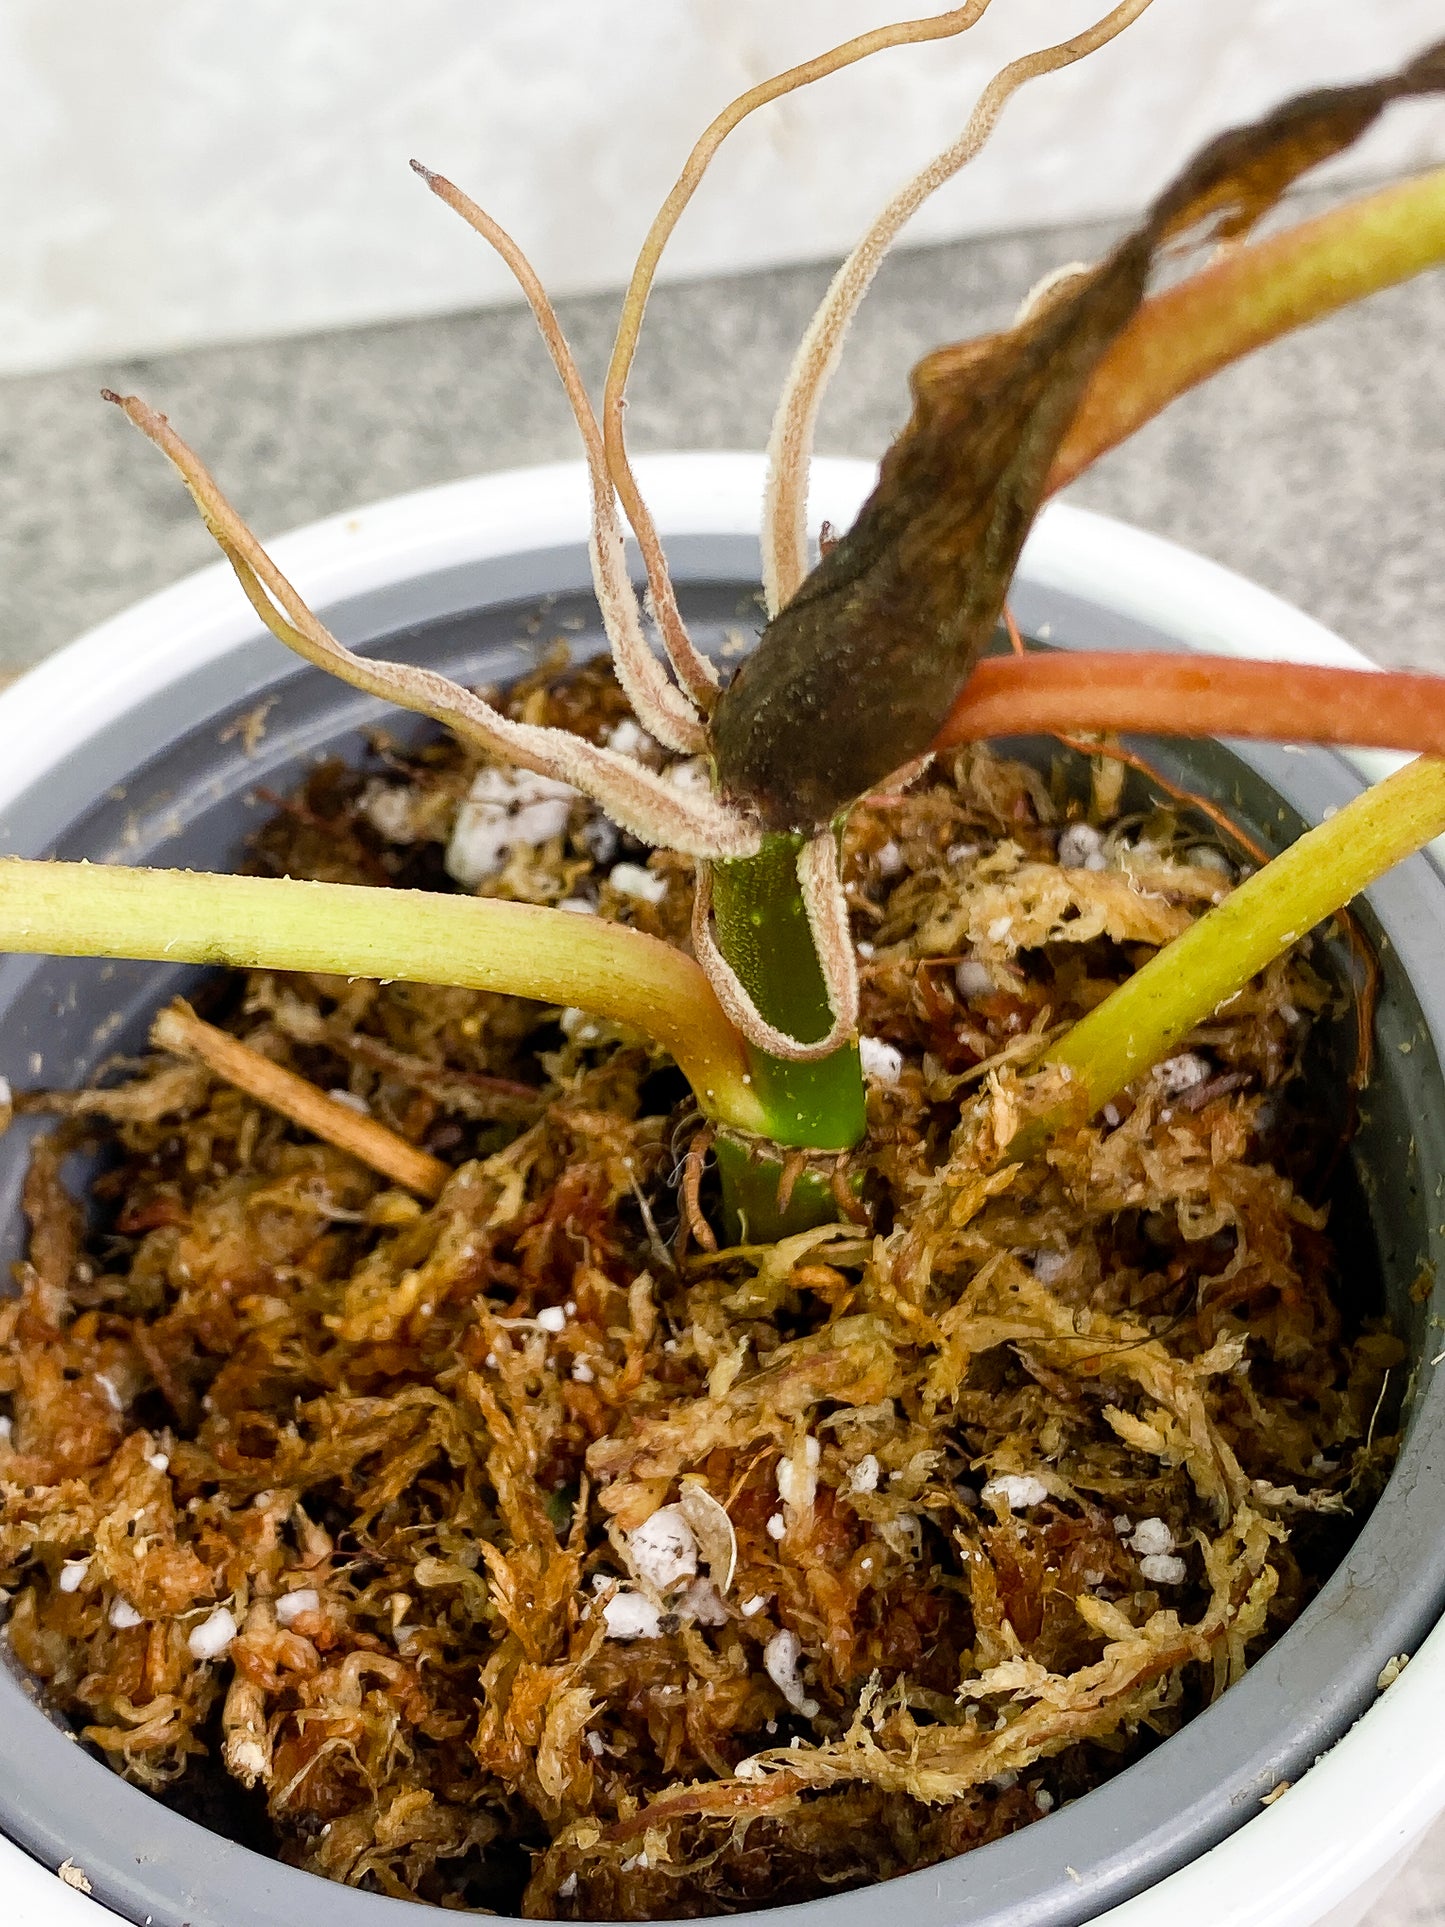 Philodendron verrucosum cobra Slightly Rooted 3 leaves 1 sprout